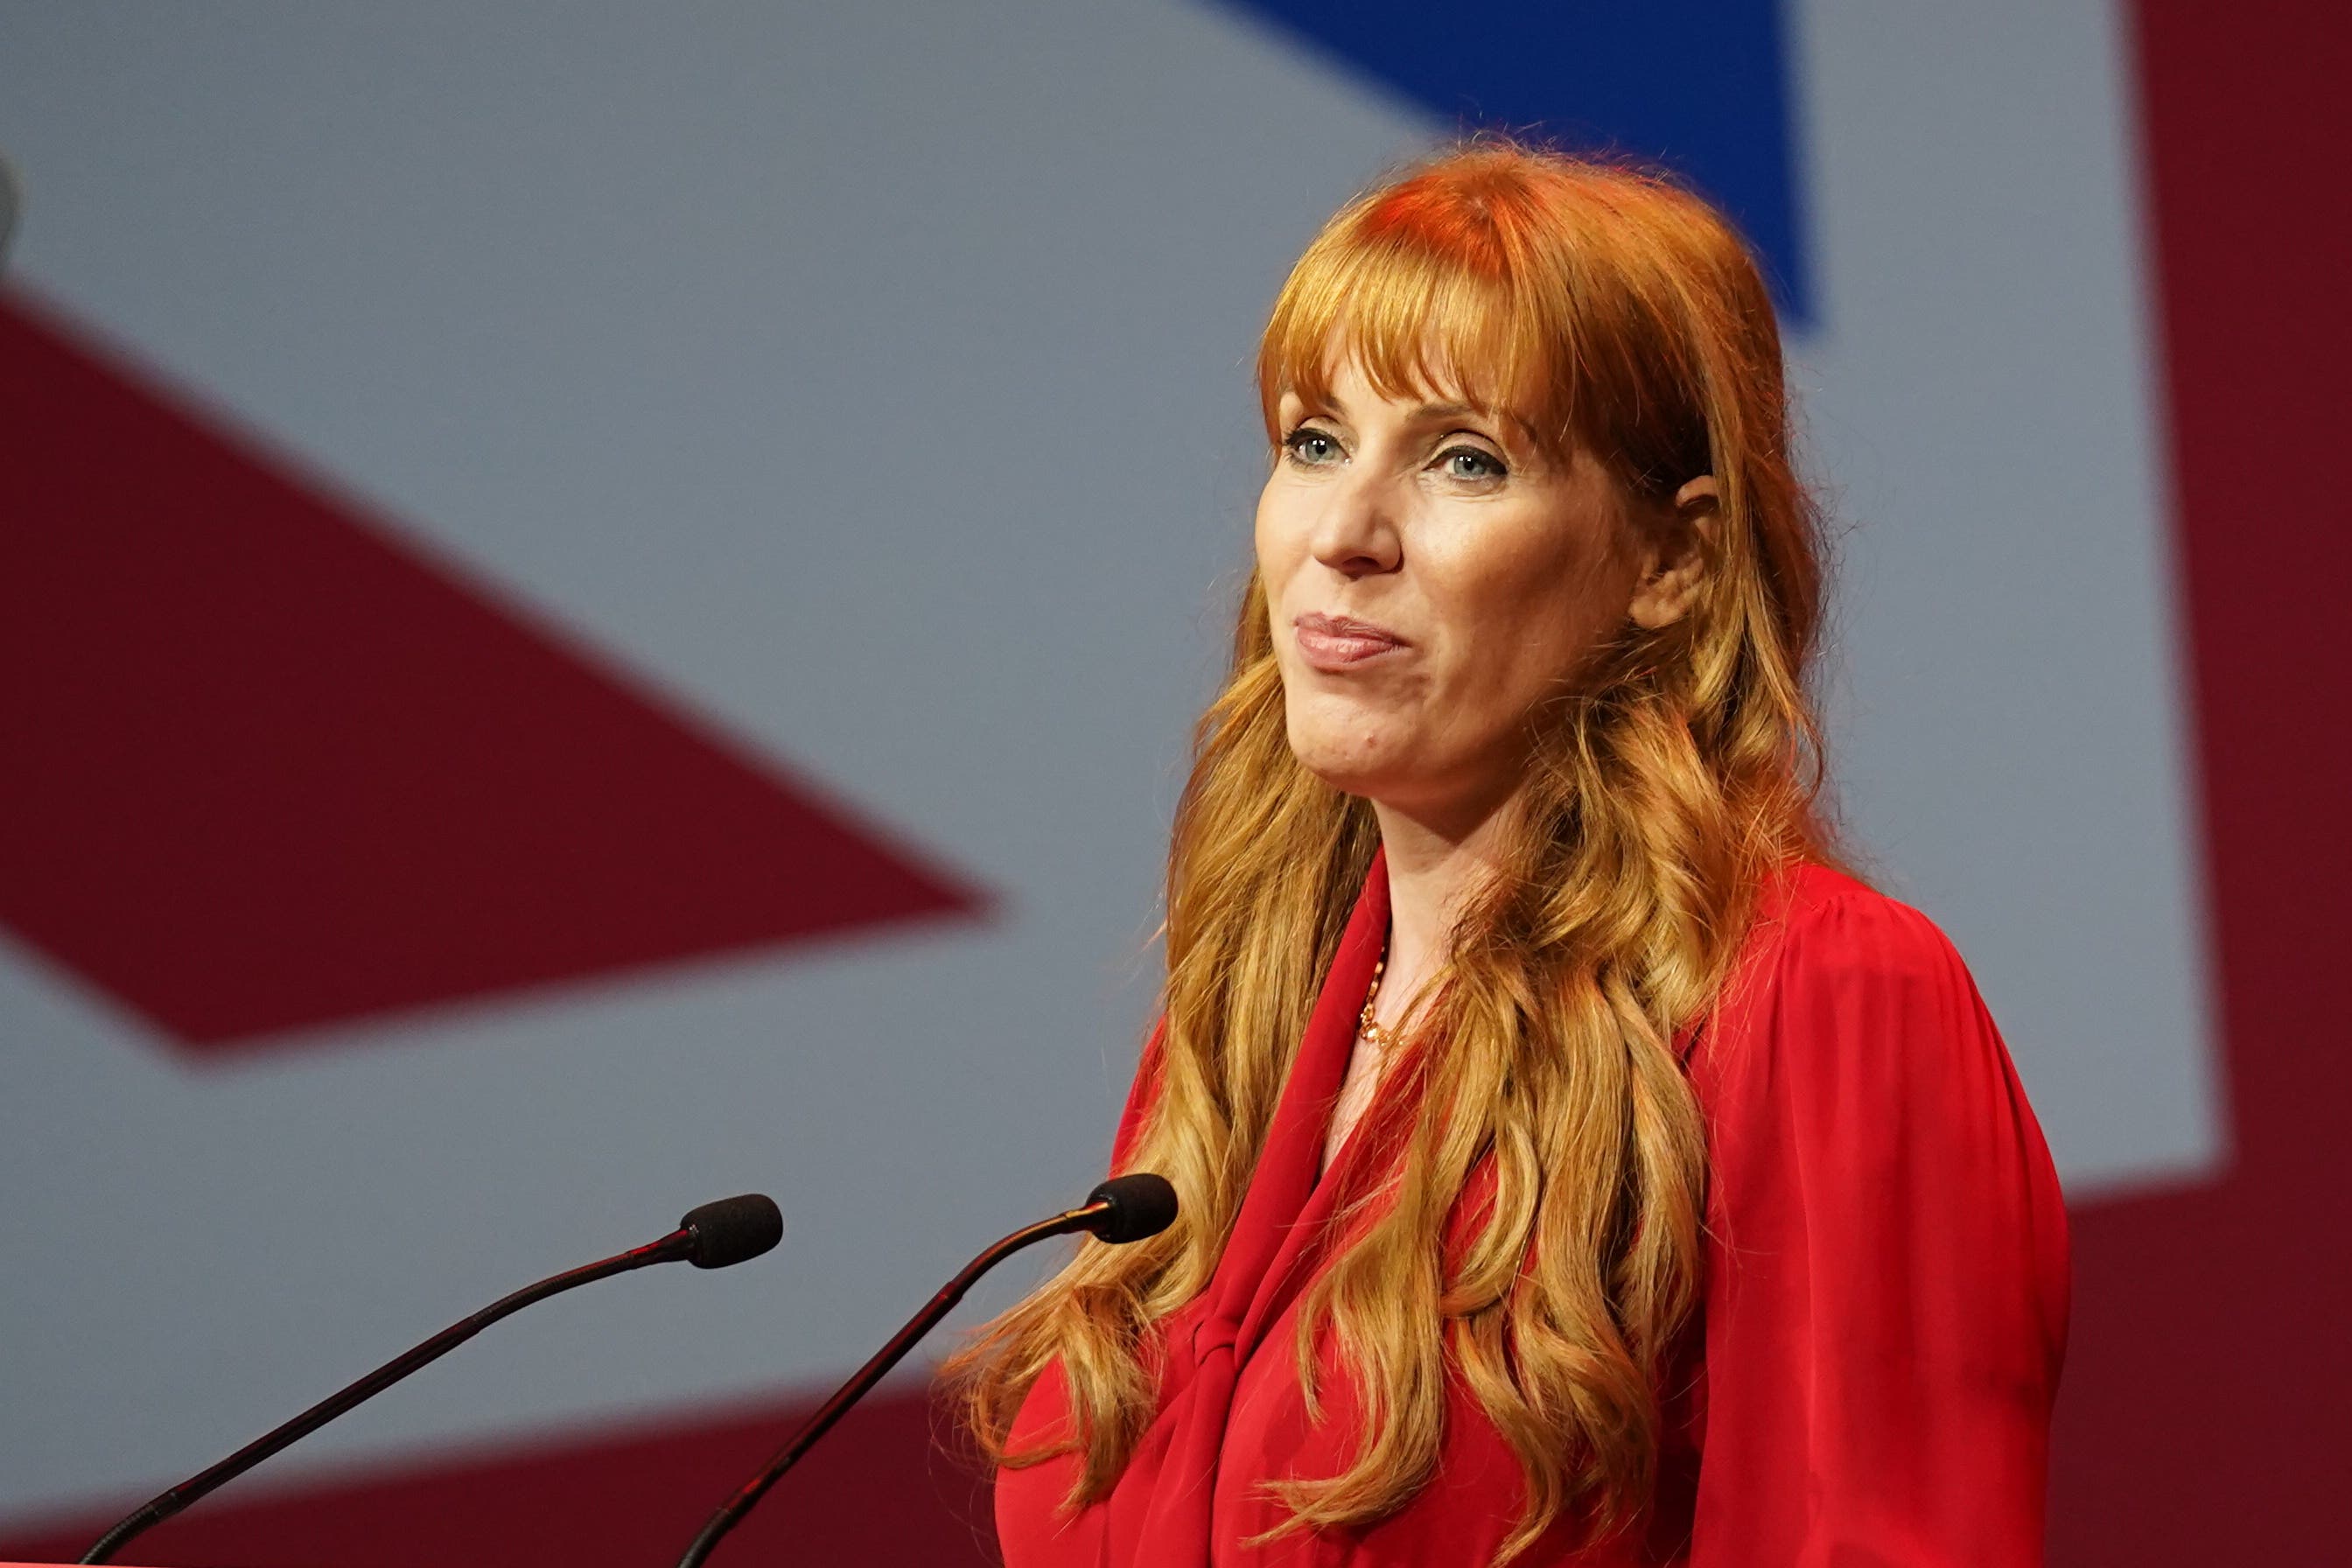 Deputy Labour leader Angela Rayner pledged to protect workers’ rights